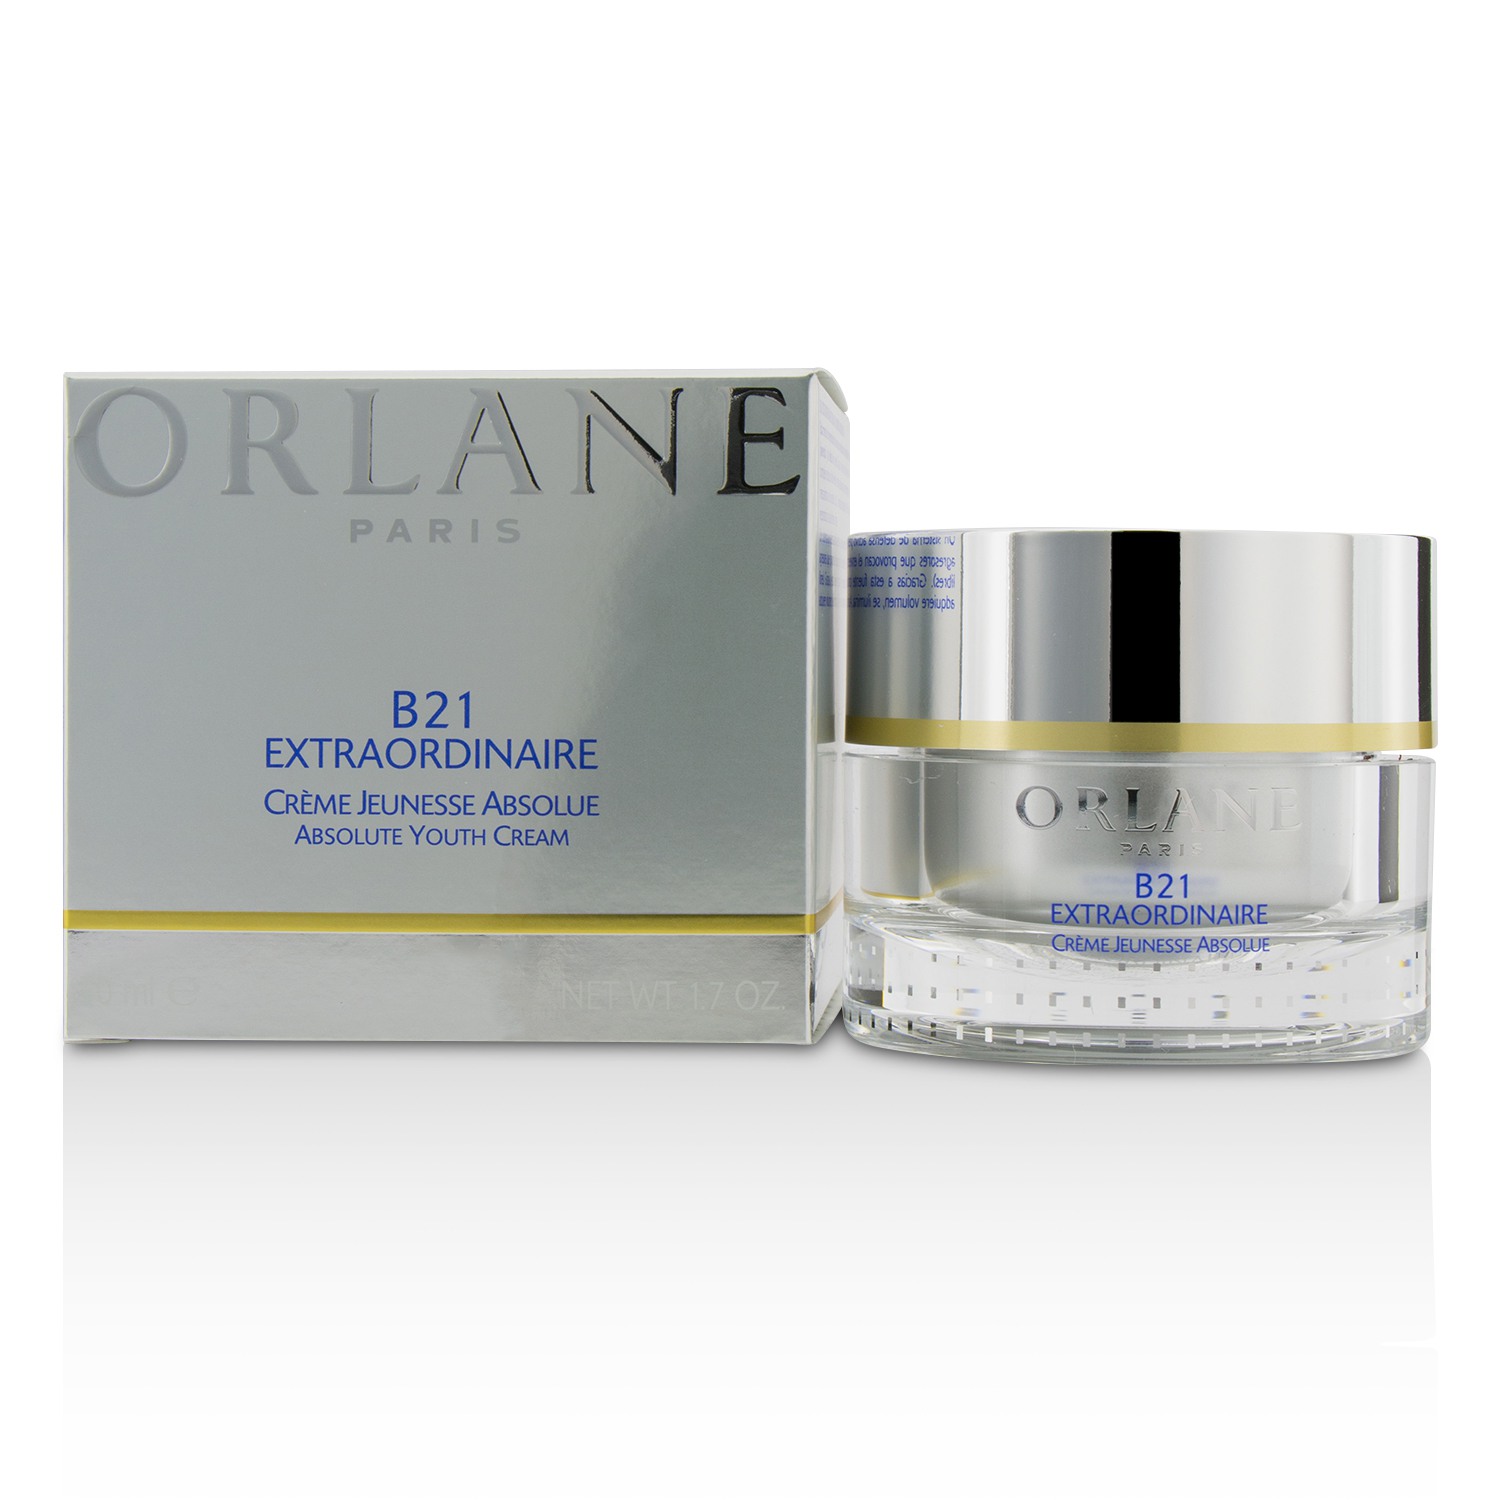 B21 Extraordinaire Absolute Youth Cream Orlane Image